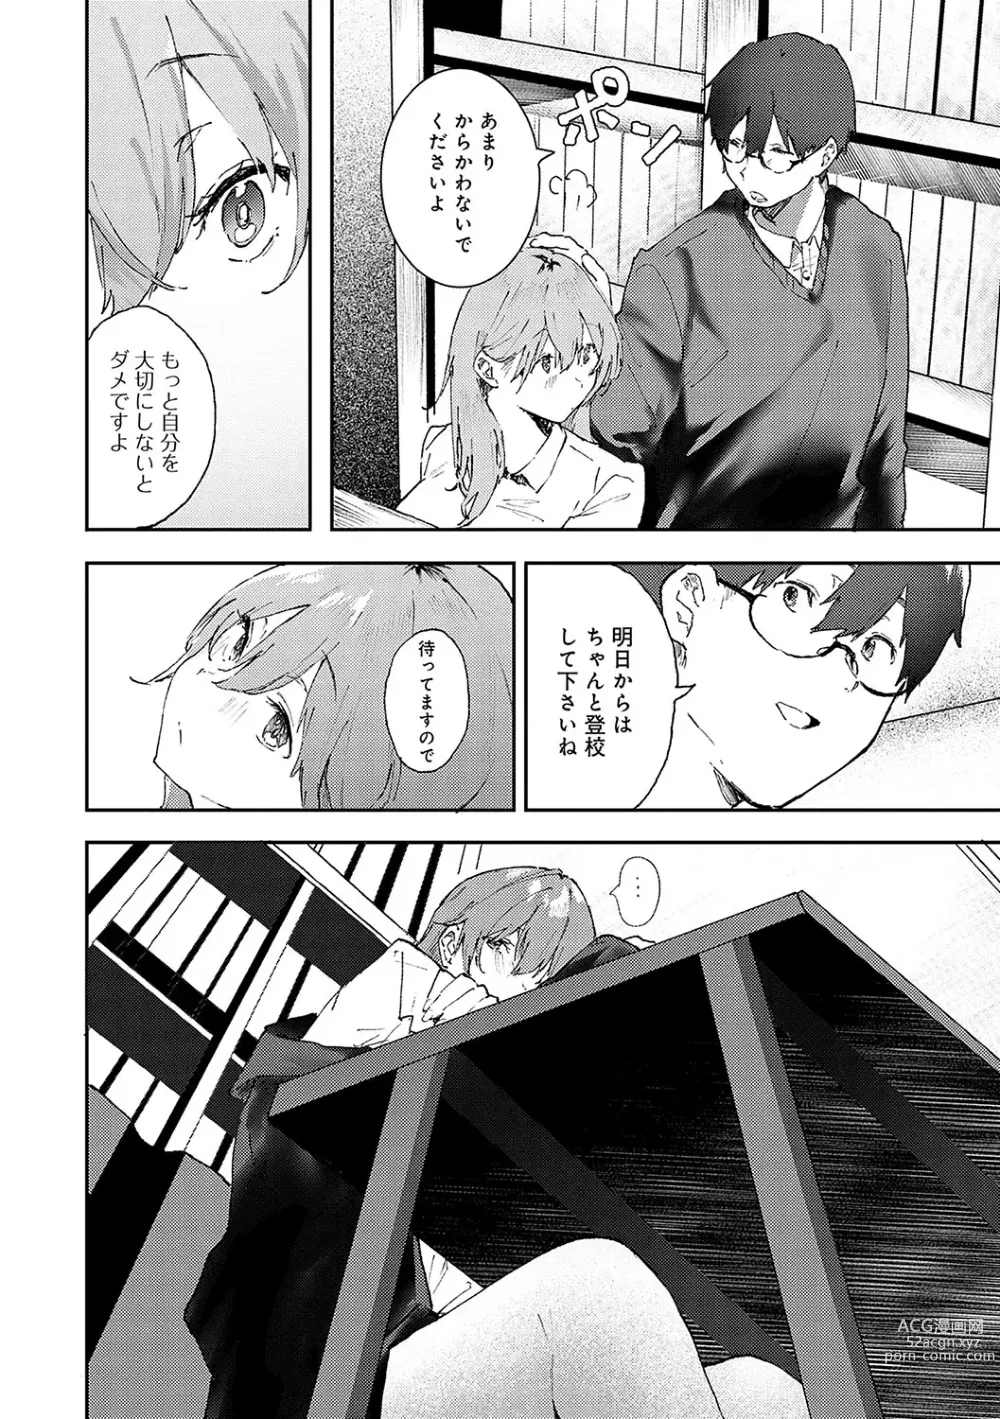 Page 9 of manga Zutto Kono mama... - Stay like this forever.